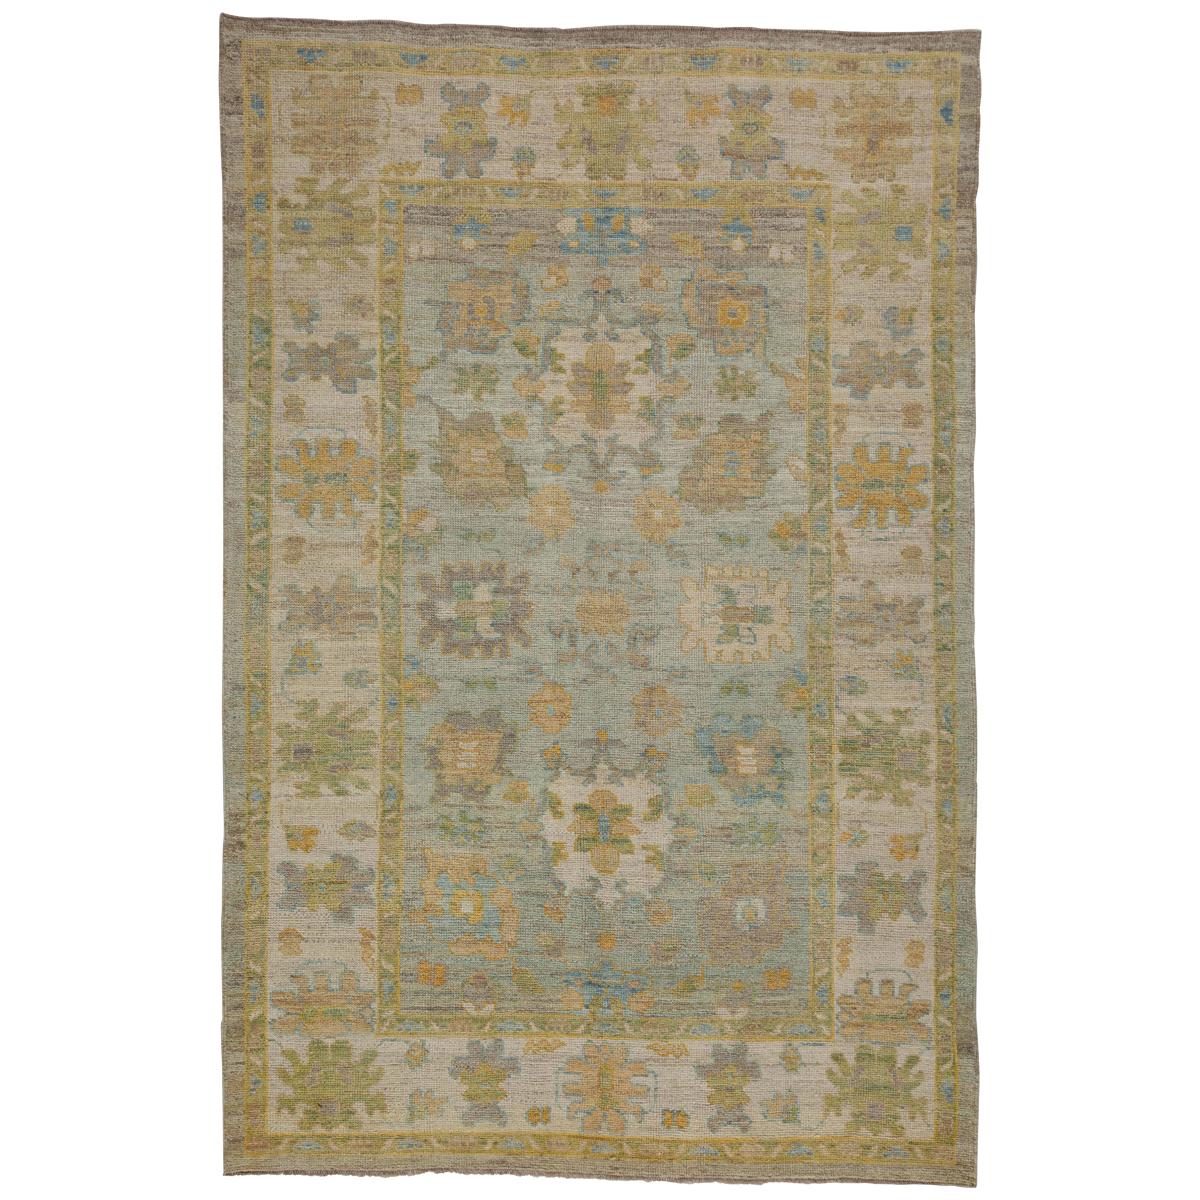 Modern Turkish Rug Handwoven Oushak Style with Blue and Beige Mixed Floral Field For Sale